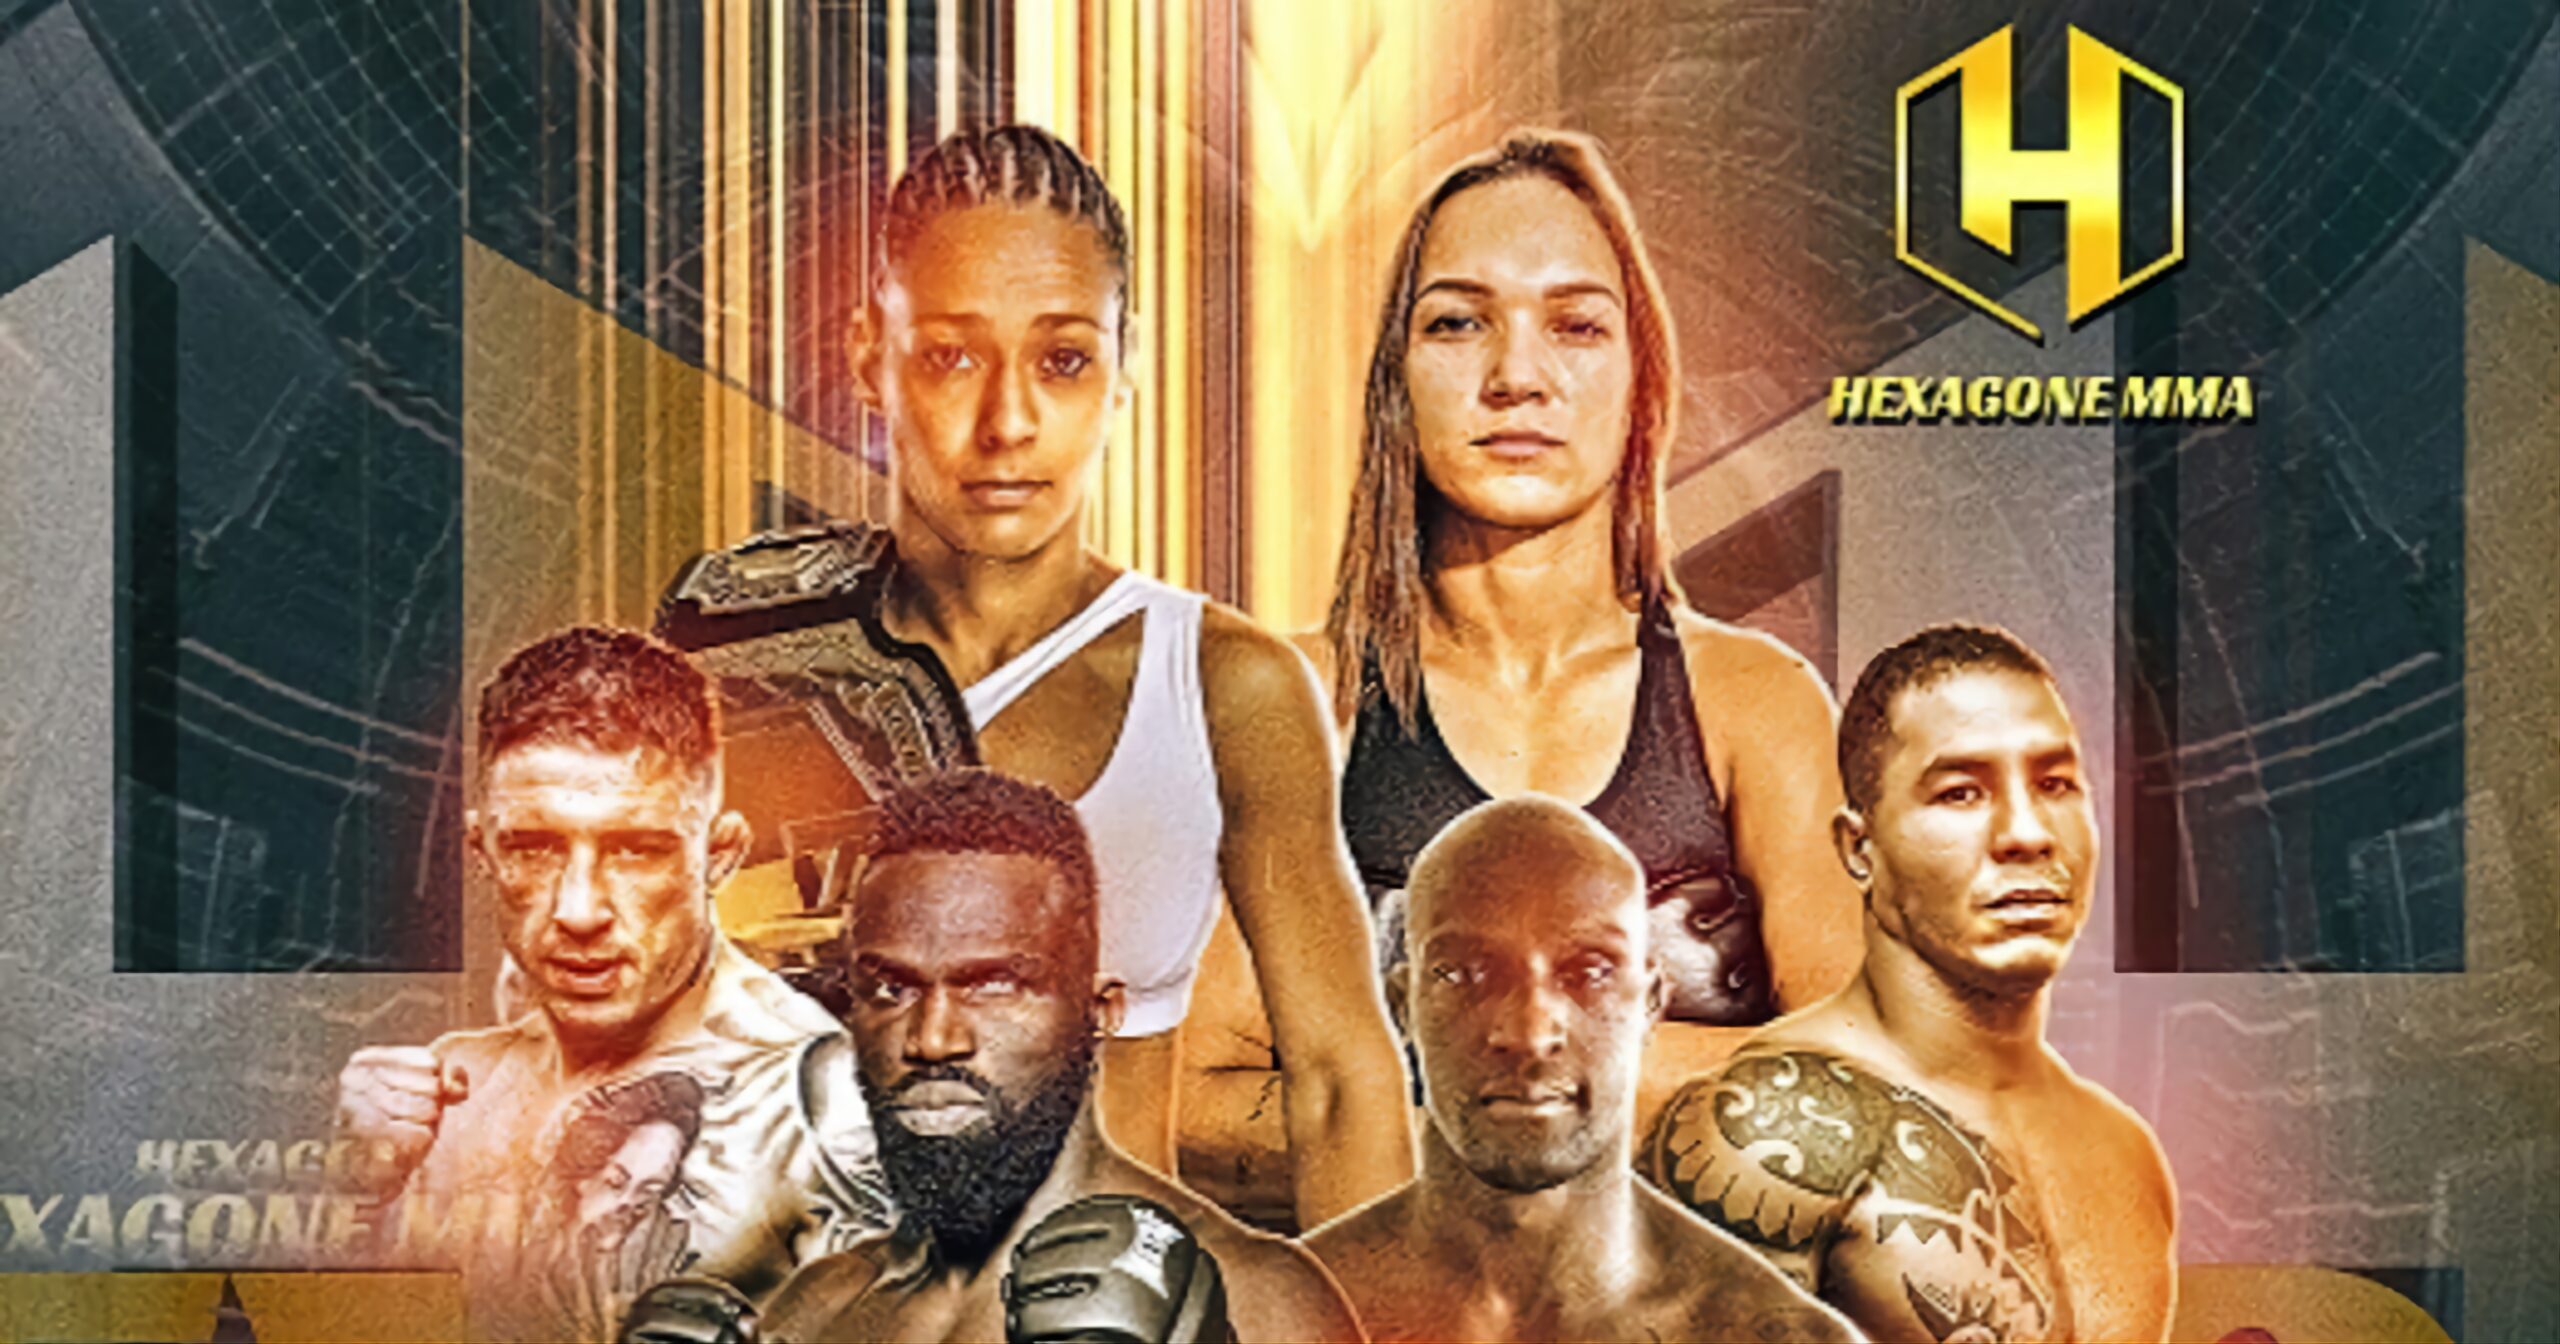 How to watch Hexagone MMA 7 this Saturday MMA UK